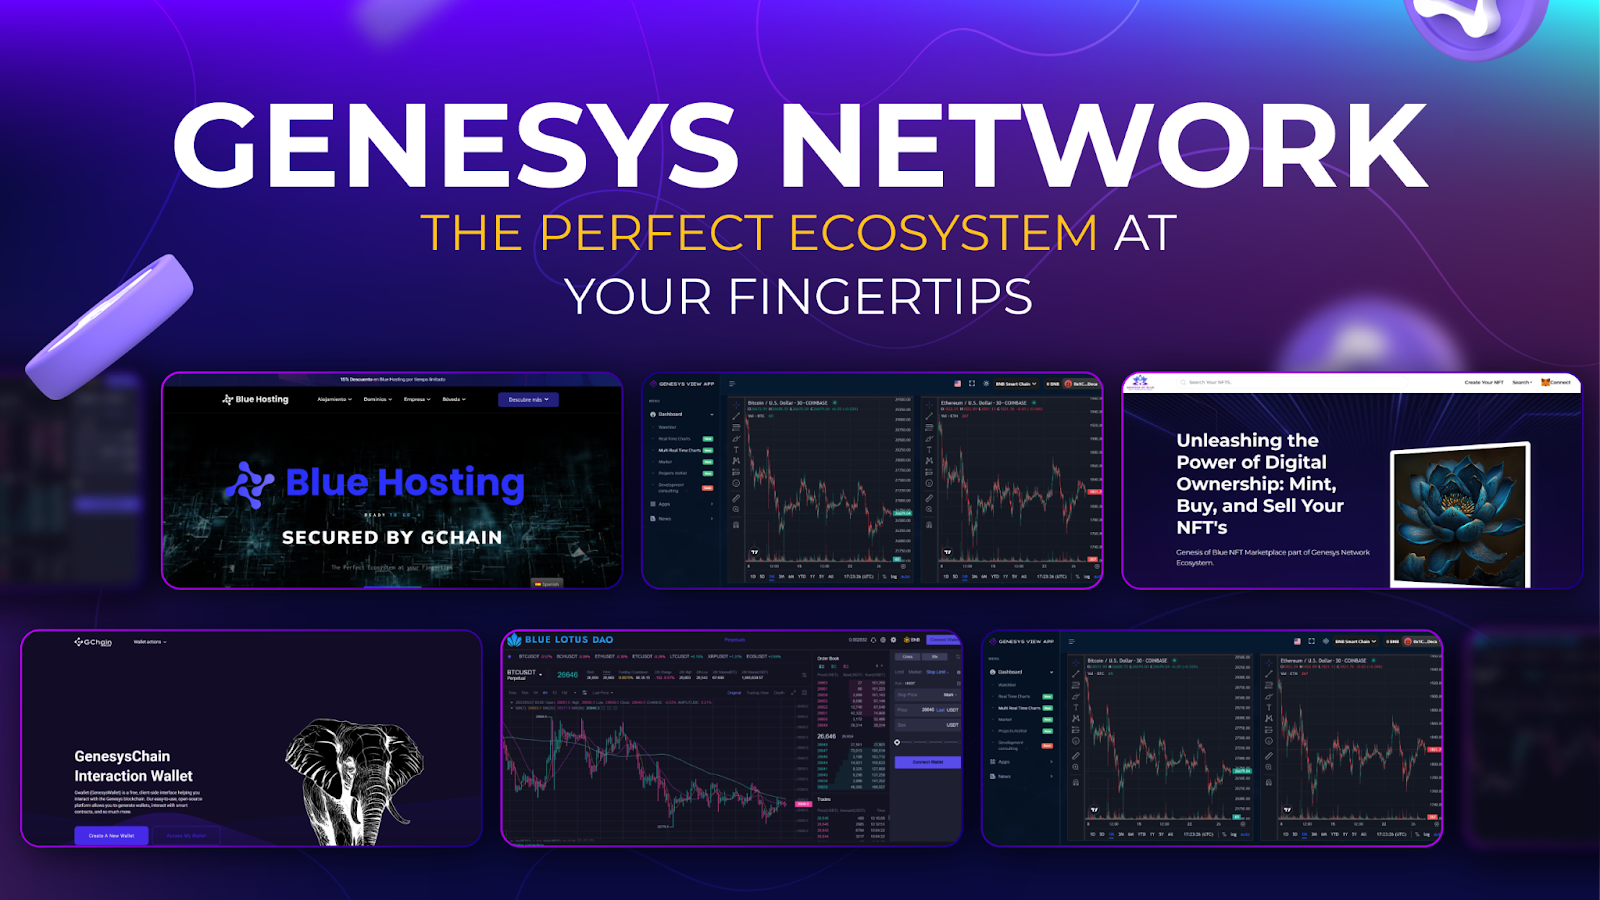 Genesys Network, Thursday, June 1, 2023, Press release picture